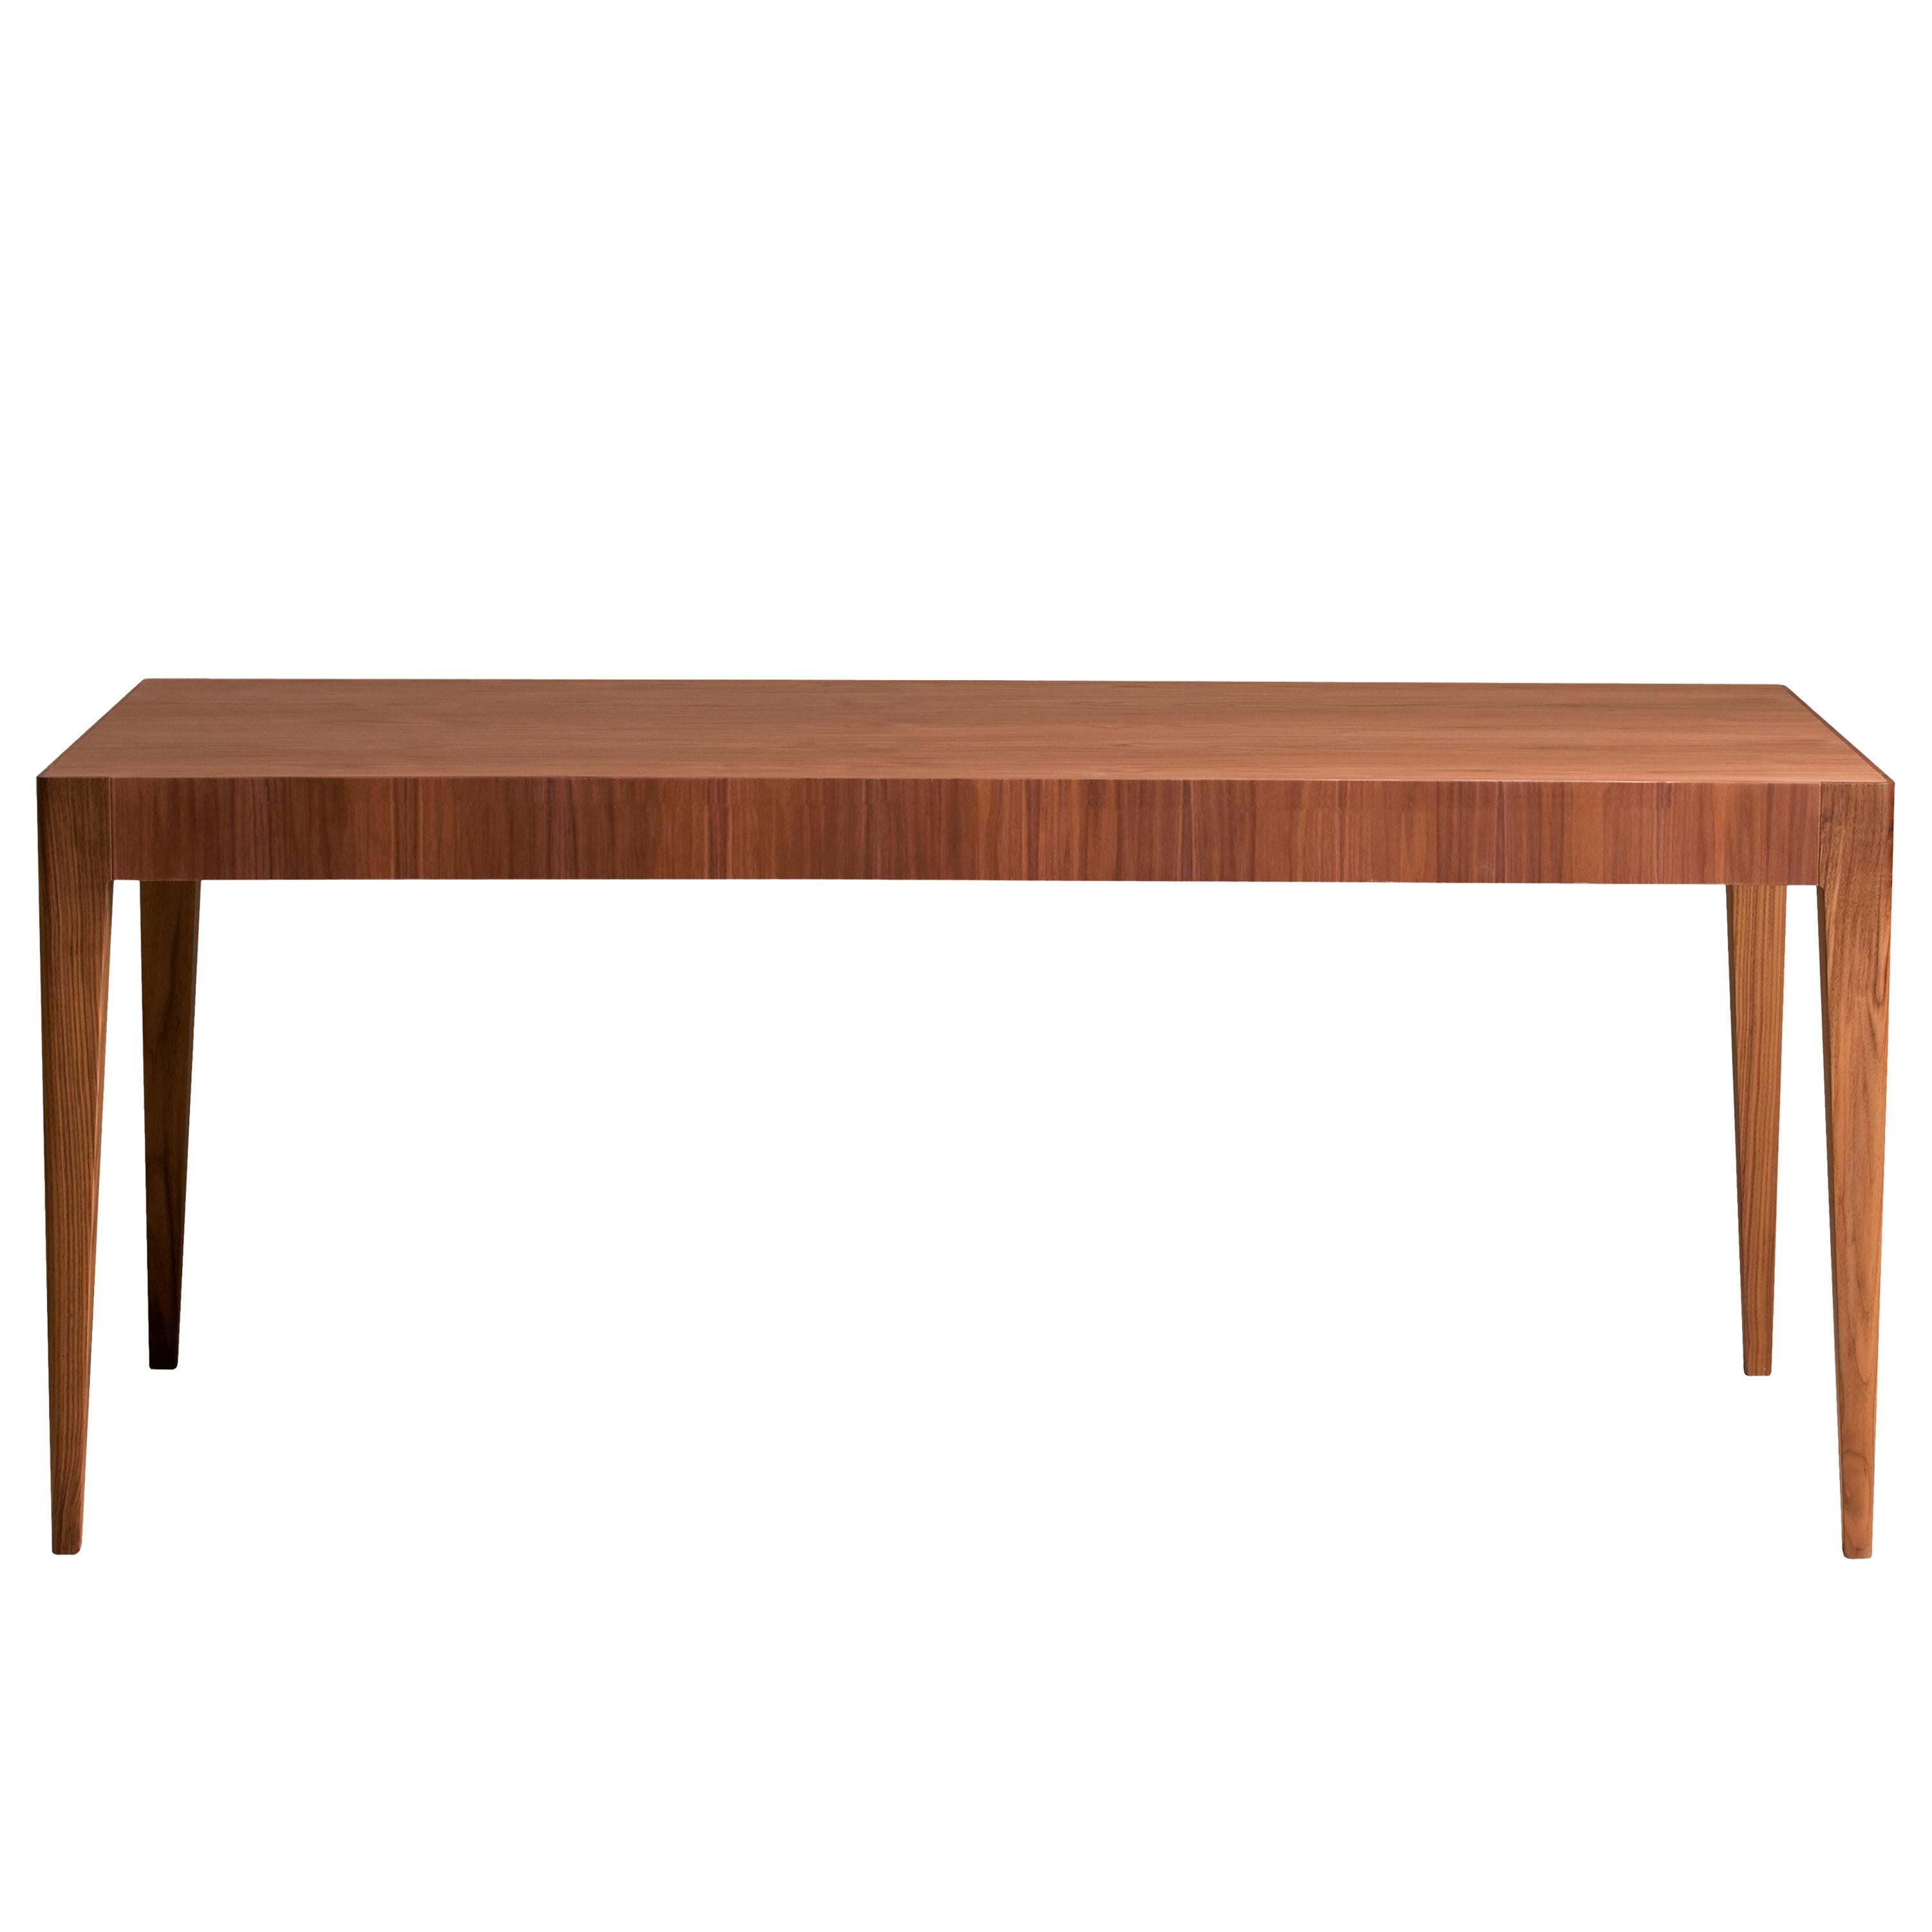 Malibù, extendable Dining Table in Ash or Canaletto Walnut Wood, by Morelato For Sale